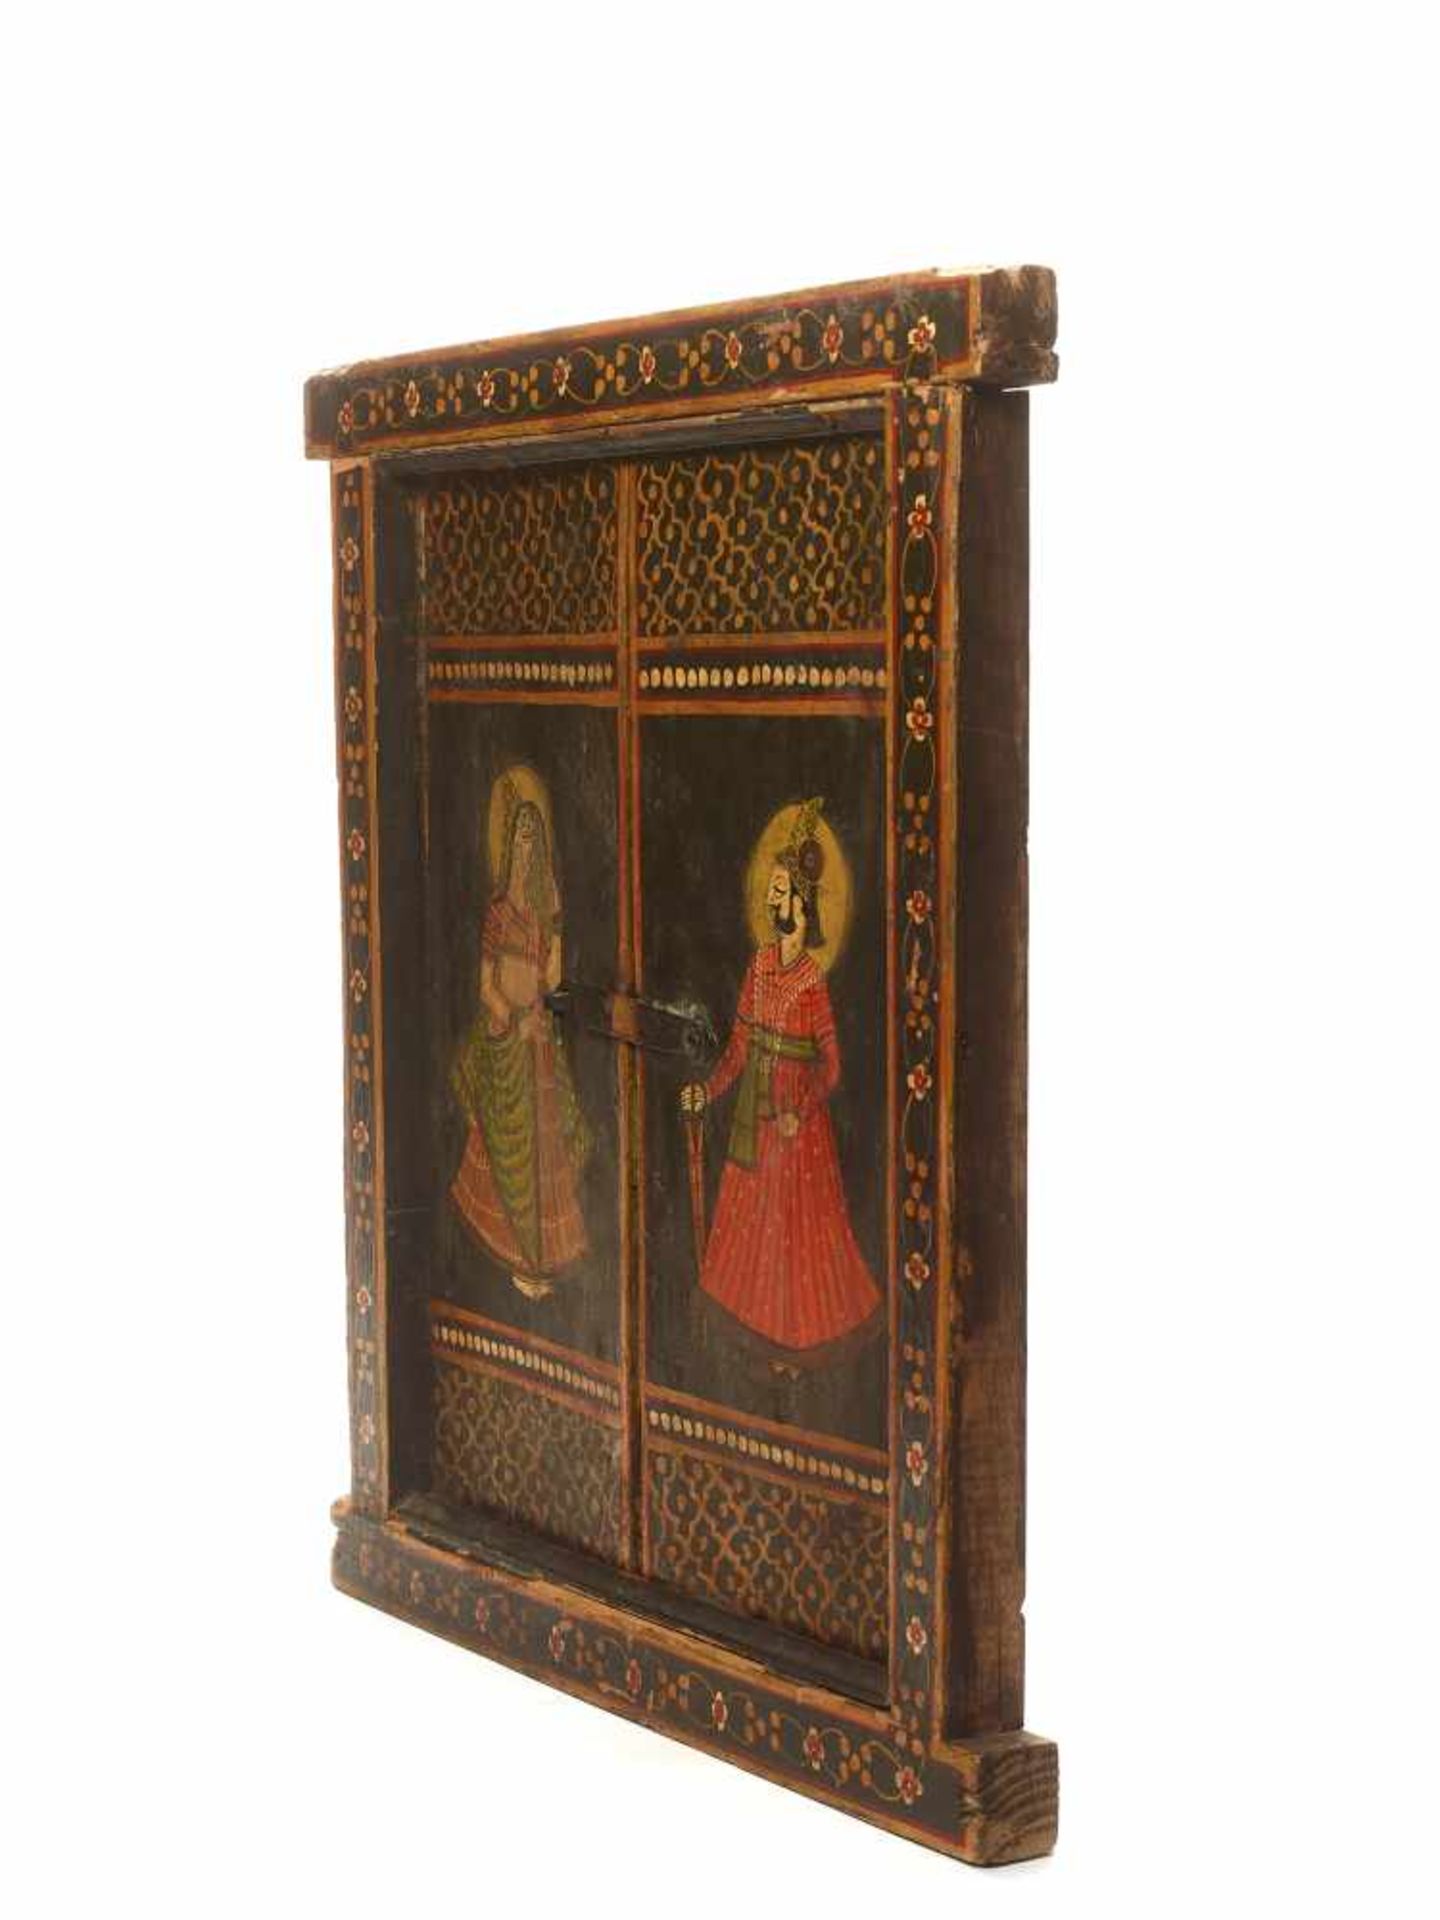 A DOUBLE-FOLDING WOODEN WINDOW - INDIA, 19TH CENTURYIndia, late 19th centuryPainted wood and - Image 3 of 4